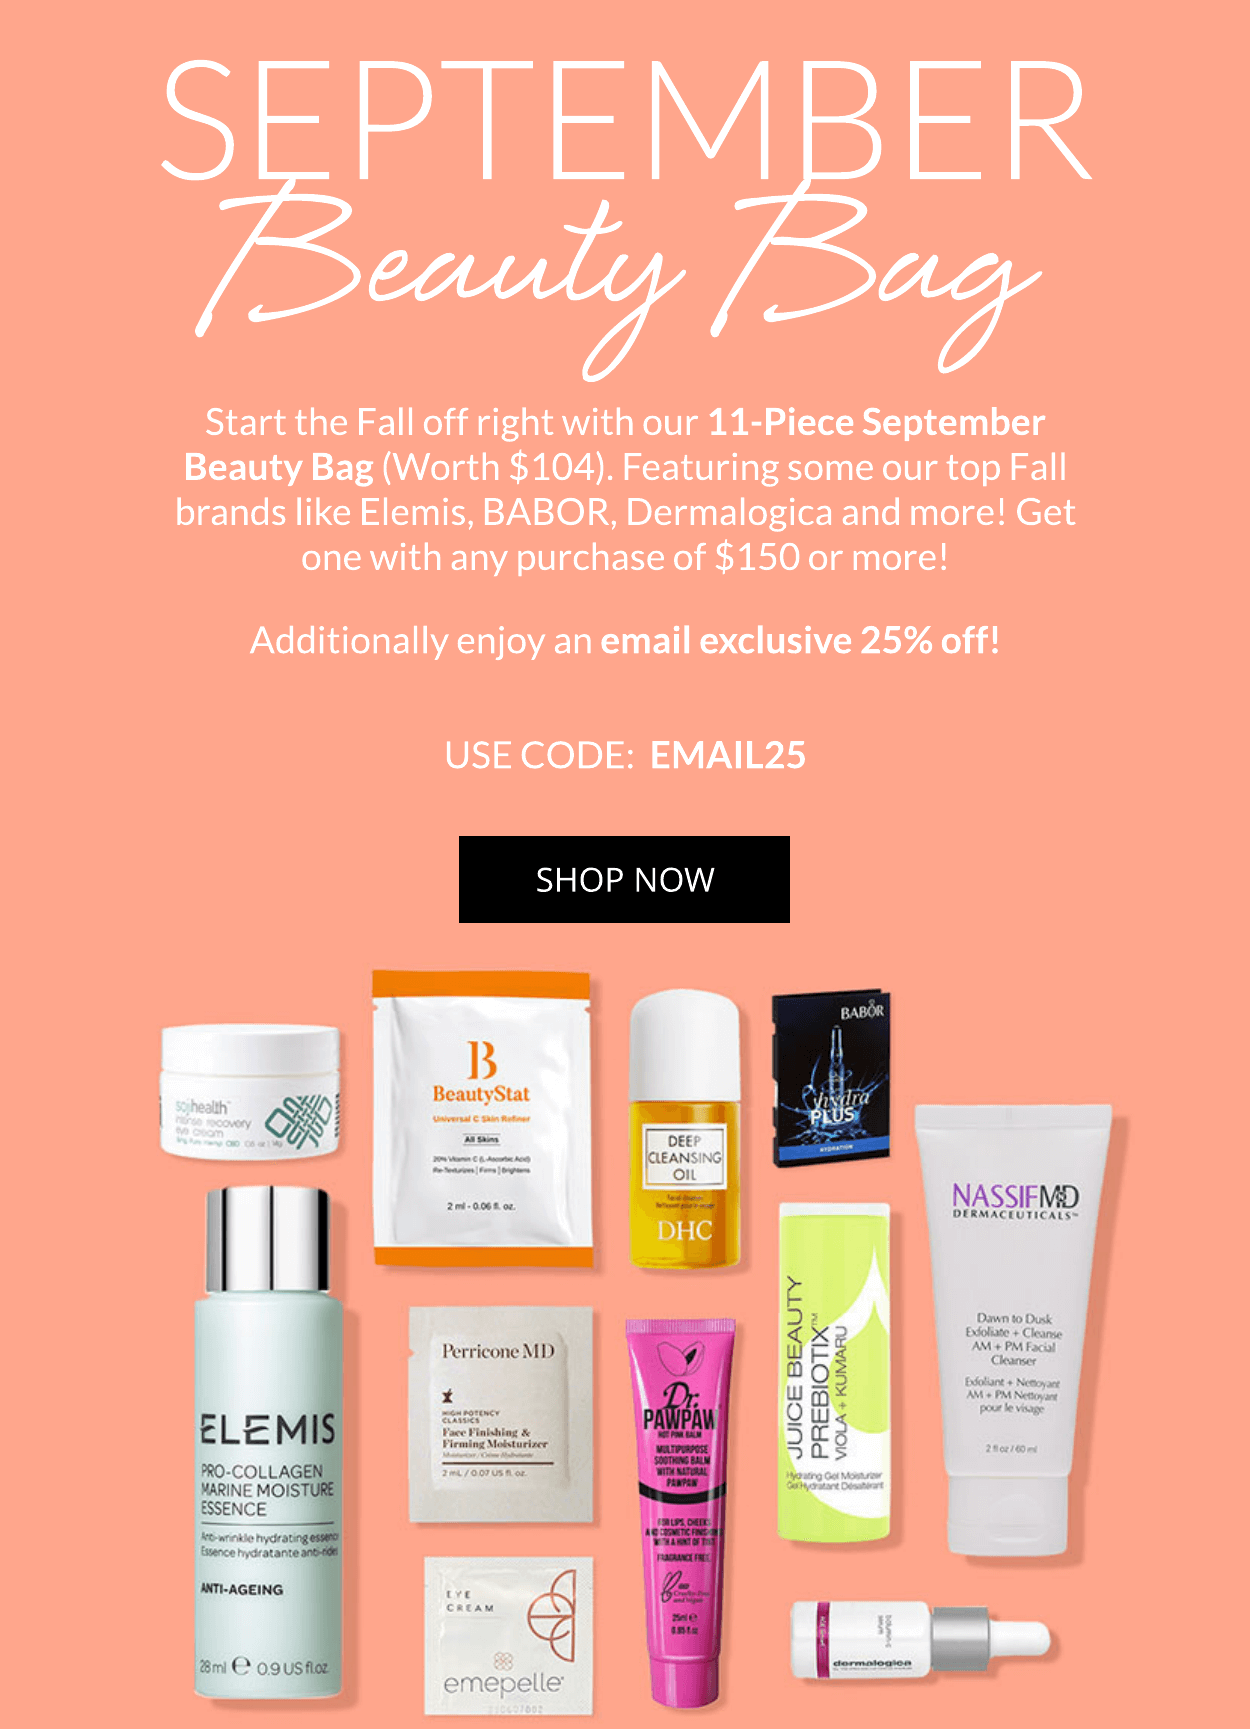 Get you September Beauty Bag when you spend $150 or more + exclusive 25% off